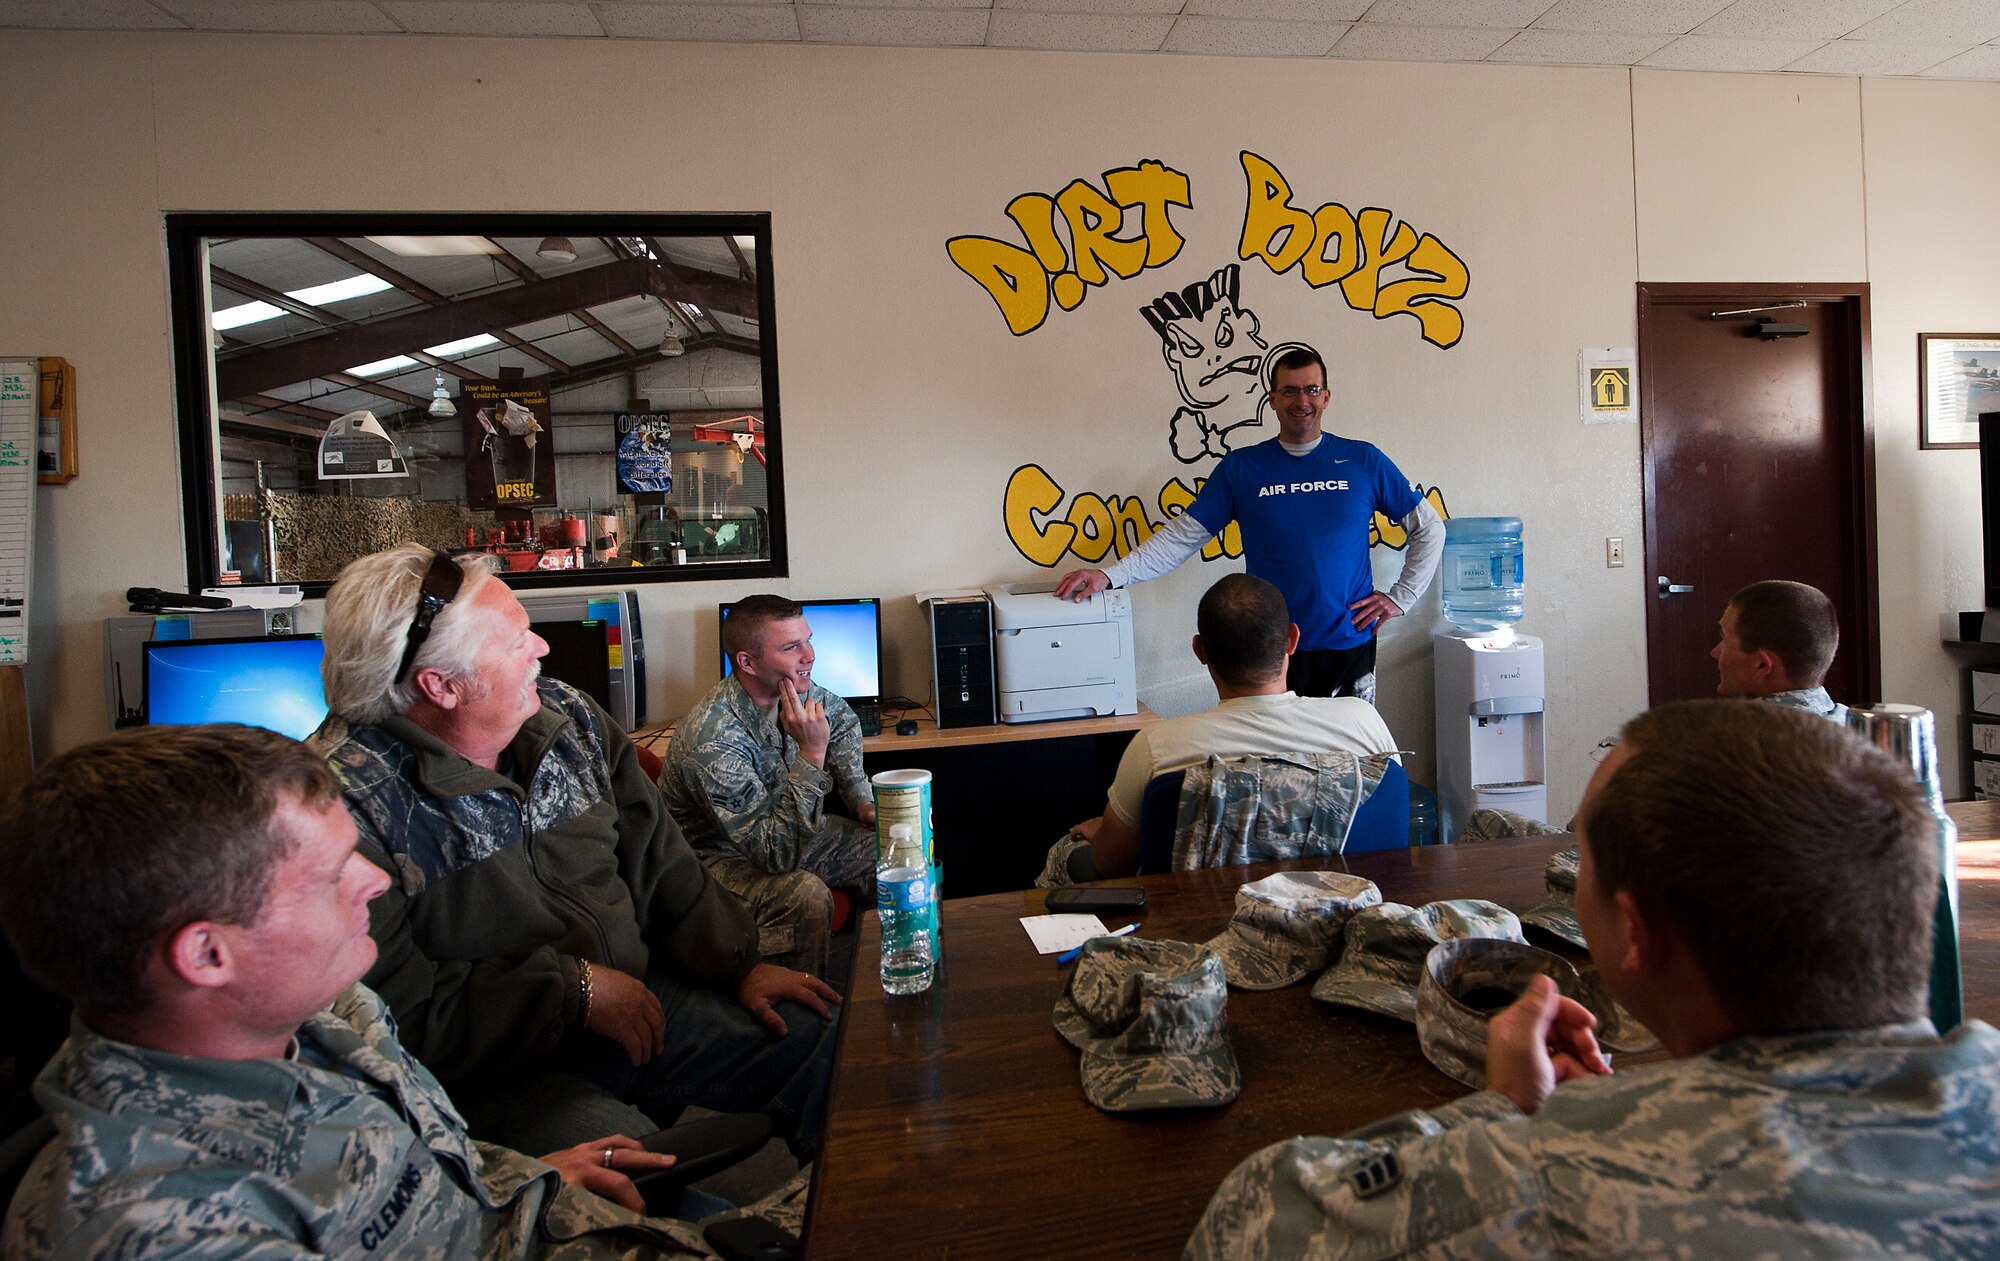 U.S. Air Force Master Sgt. Simon Wess, 7th Civil Engineer Squadron, talks to Airmen about resiliency May 3, 2013, at Dyess Air Force Base Texas. Wess will participate in the archery and air pistol portion of the 2013 Warrior Games. The Warrior Games bring military members and veterans from the Air Force, Army, Marines, Navy/Coast Guard, Special Operations Command, and British warrior team together to participate in an Olympic-style competition, which includes sitting volleyball, wheel chair basketball, swimming, cycling, track and field, archery and competitive shooting, and are open to all wounded, ill and injured members. While deployed in 2005, Wess suffered damage to his lungs. He also copes with survivor guilt after his convoy was attacked during a deployment to Afghanistan in 2009 and 2010. (U.S. Air Force photo by Airman 1st Class Damon Kasberg/ Released)